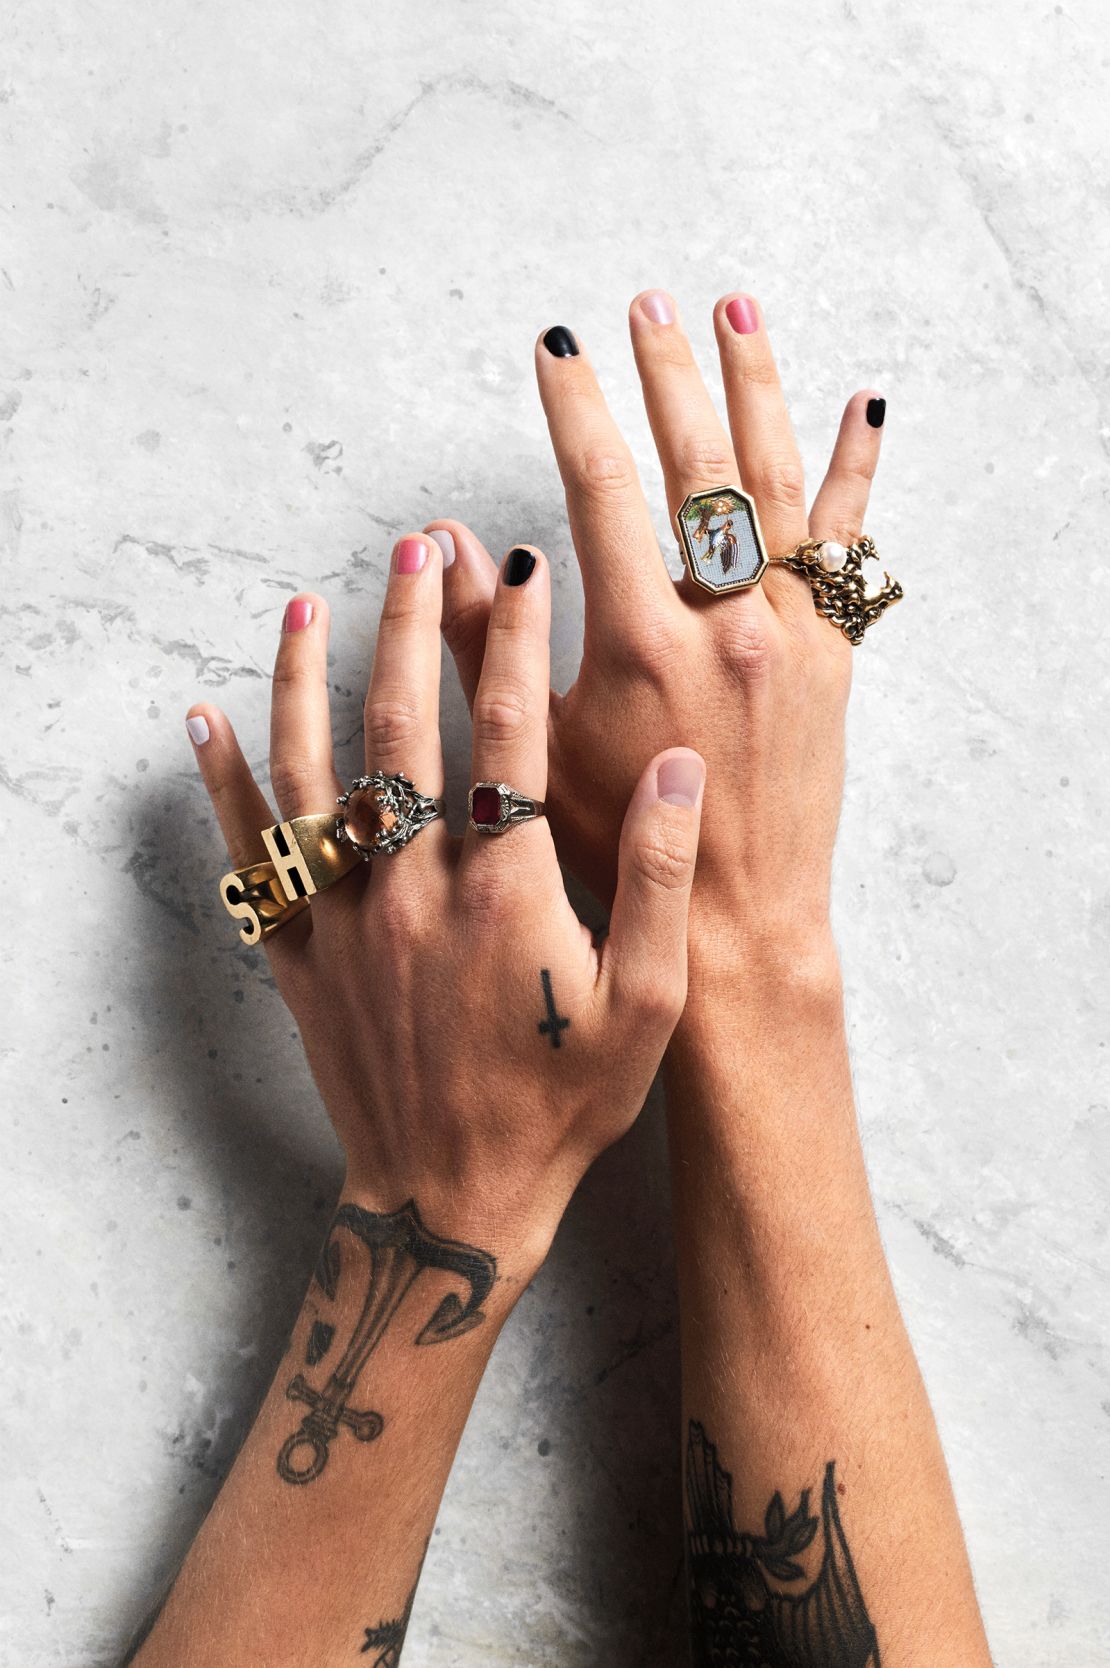 Harry Styles' beauty and lifestyle brand Pleasing includes nail polishes and skin care products.